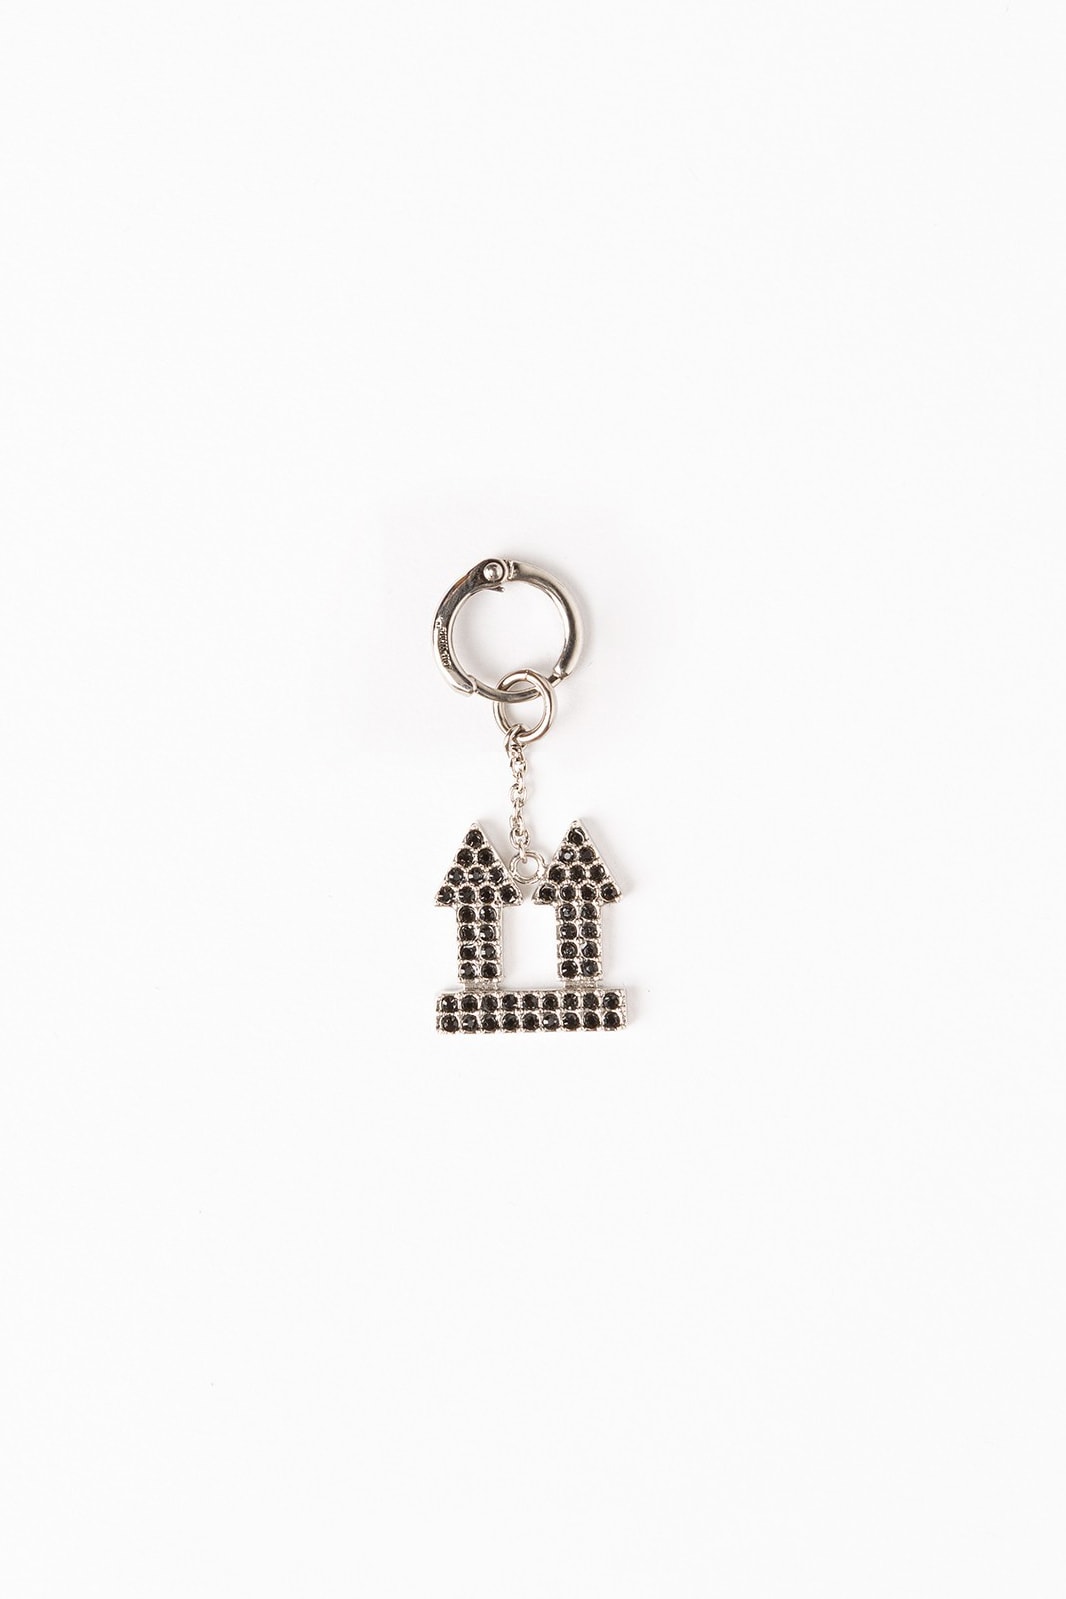 Off White Jewelry Collection Arrows Keychain Silver